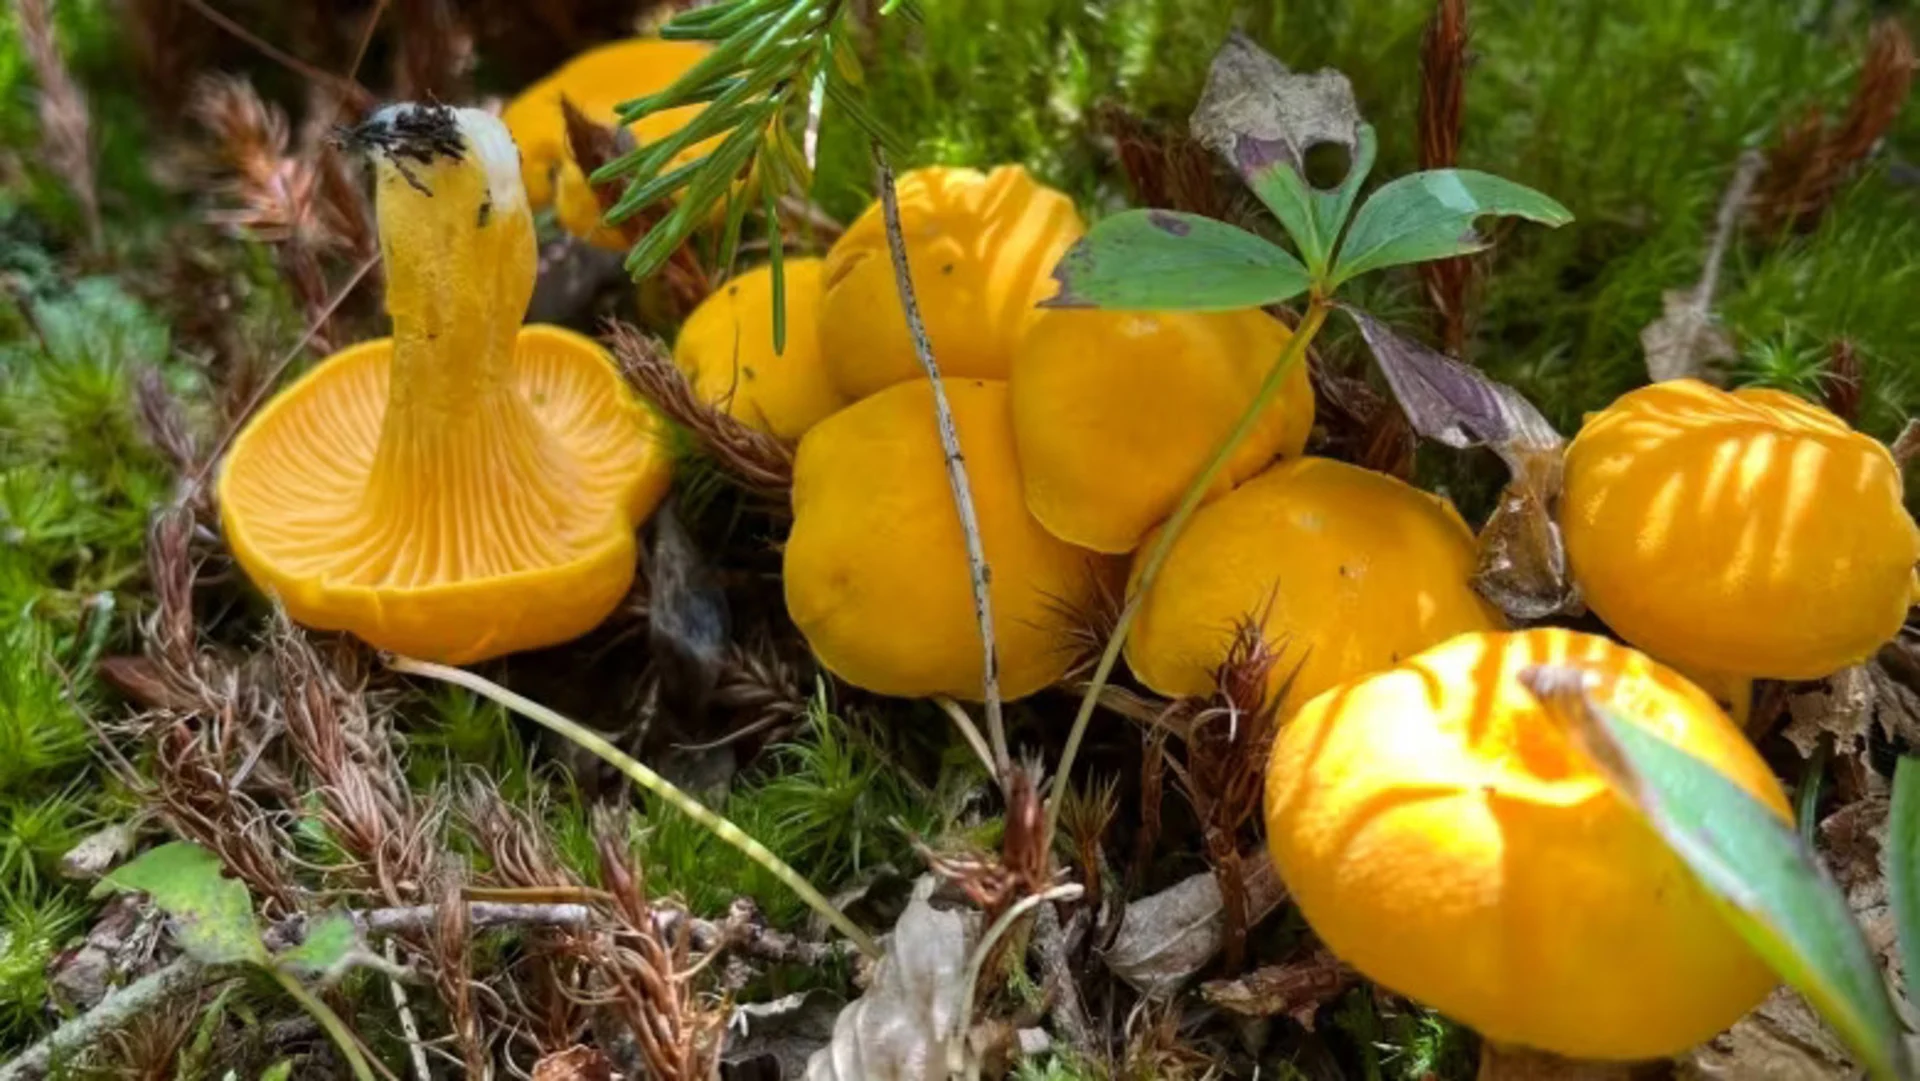 Mushrooms thriving in Nova Scotia's wet summer, say foragers